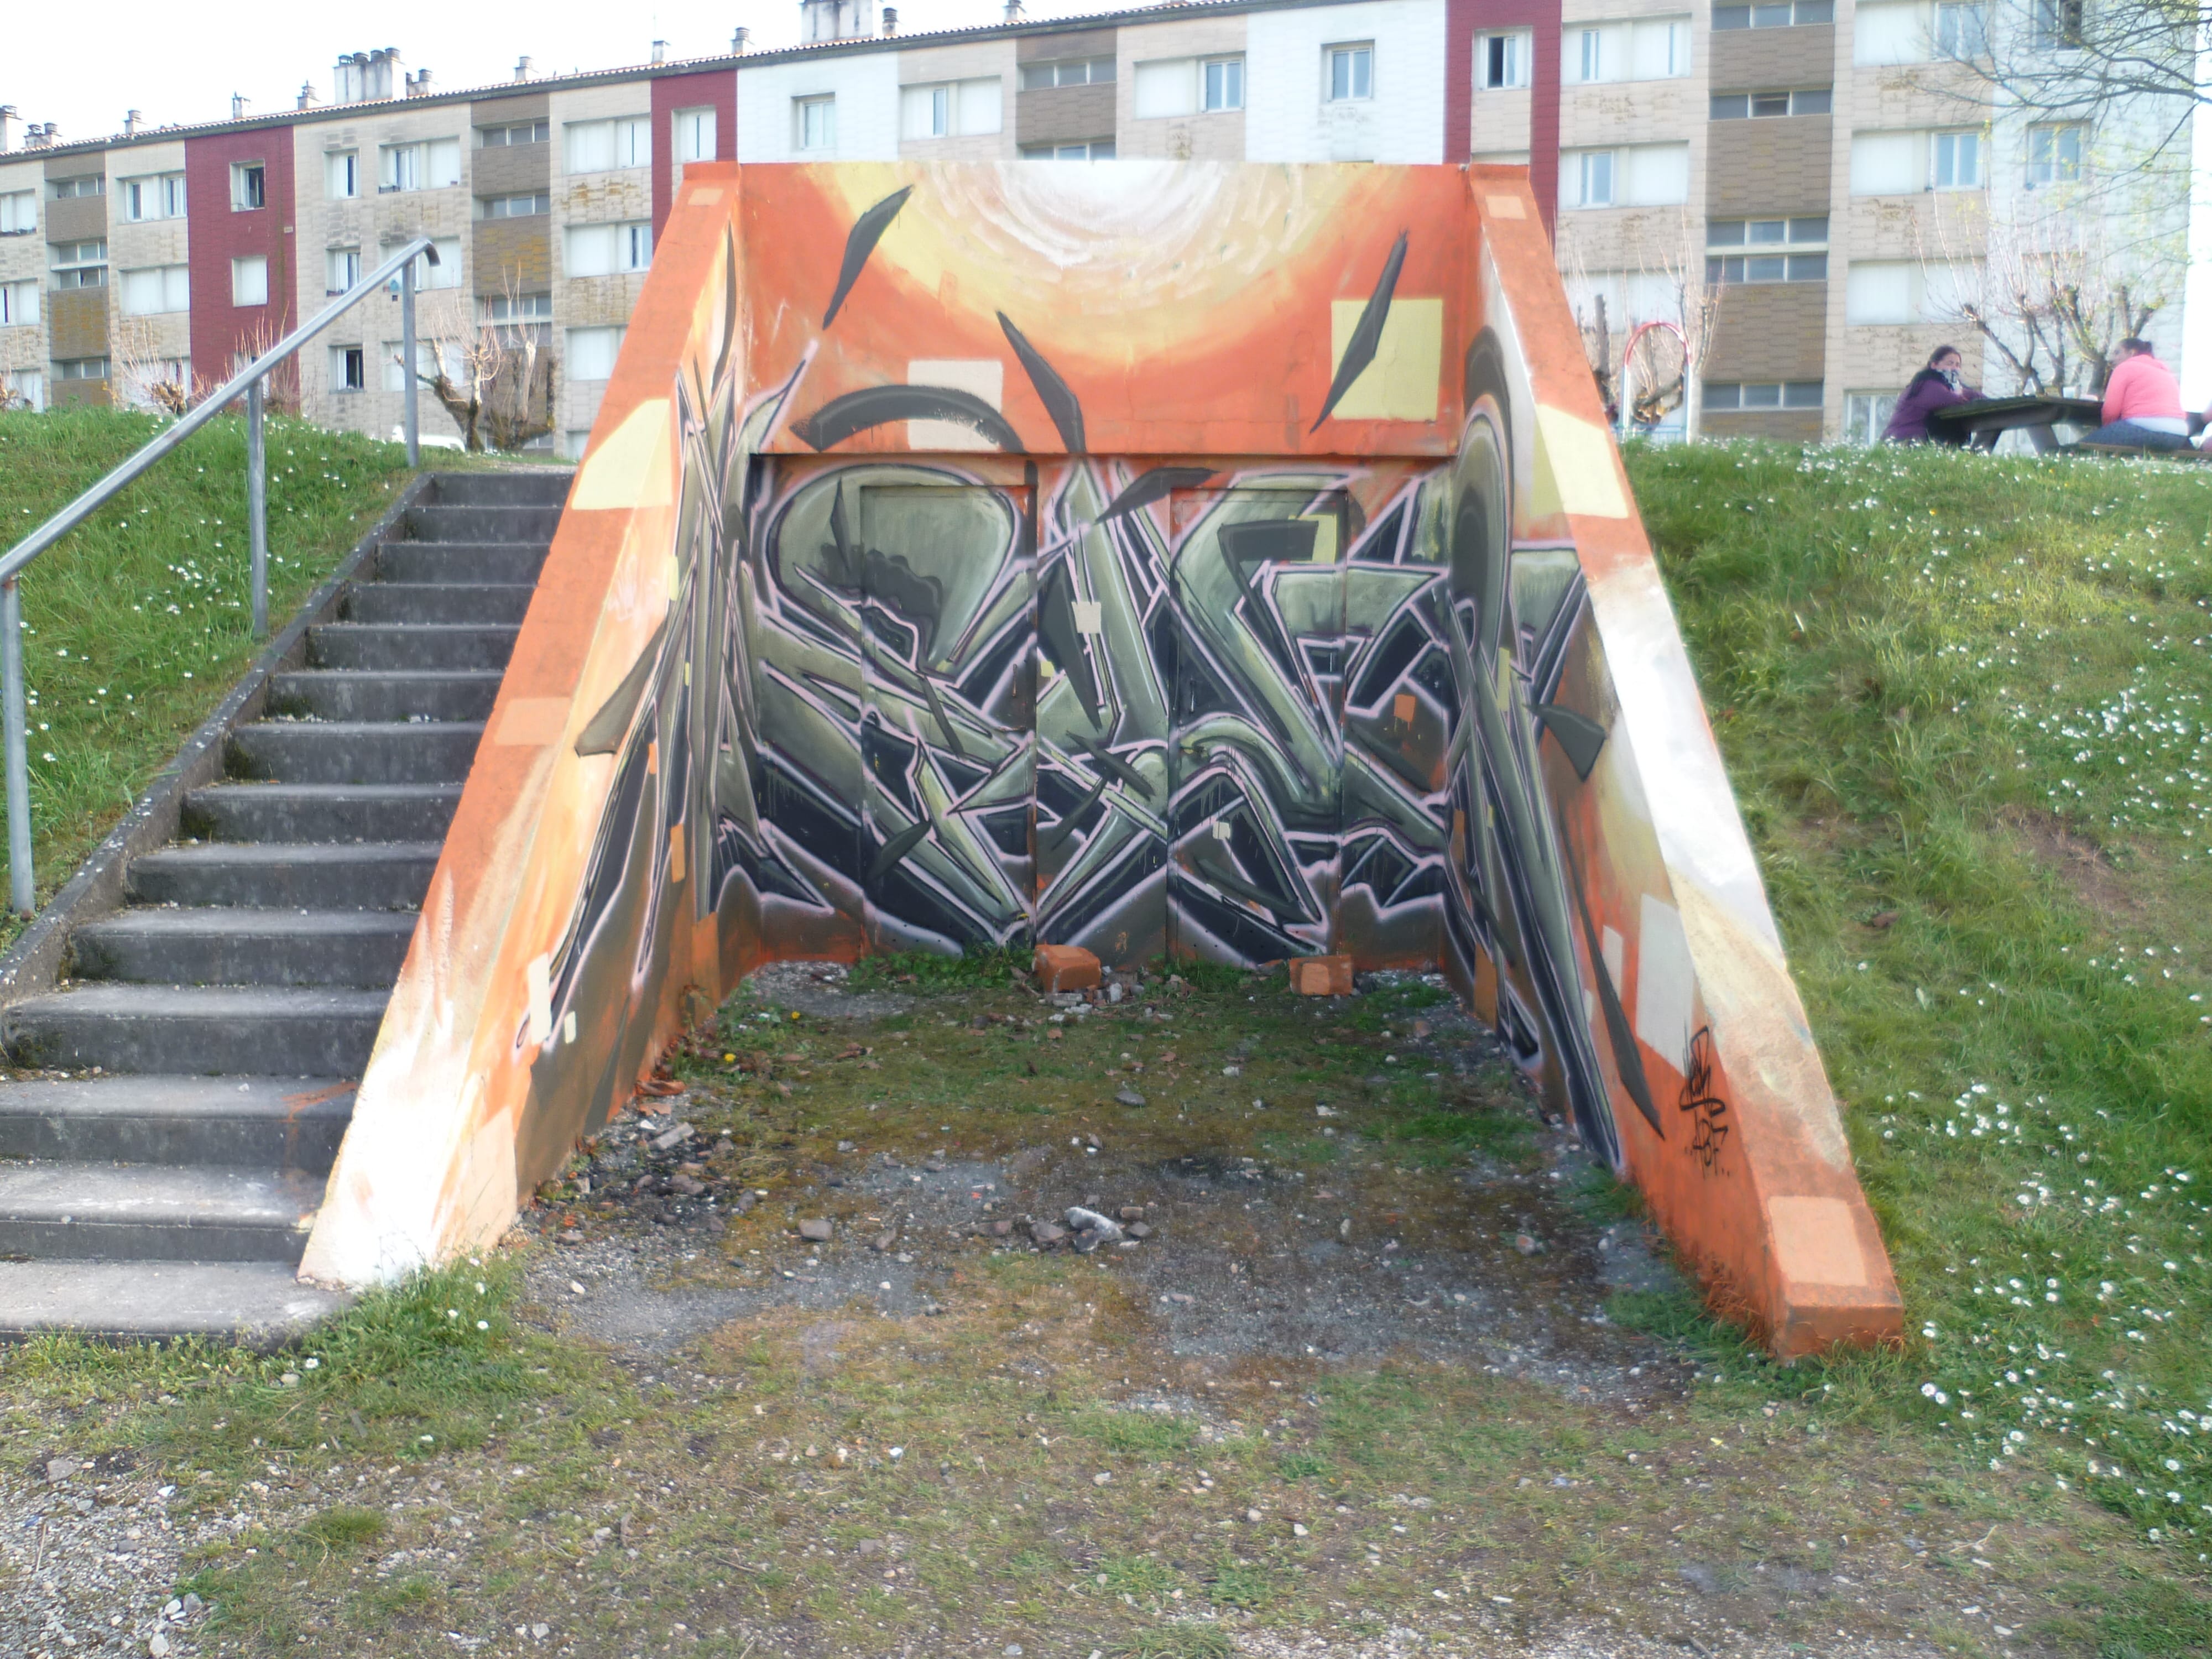 Graffiti 5644 #neurabf captured by Neur Abf in Coulounieix-Chamiers France